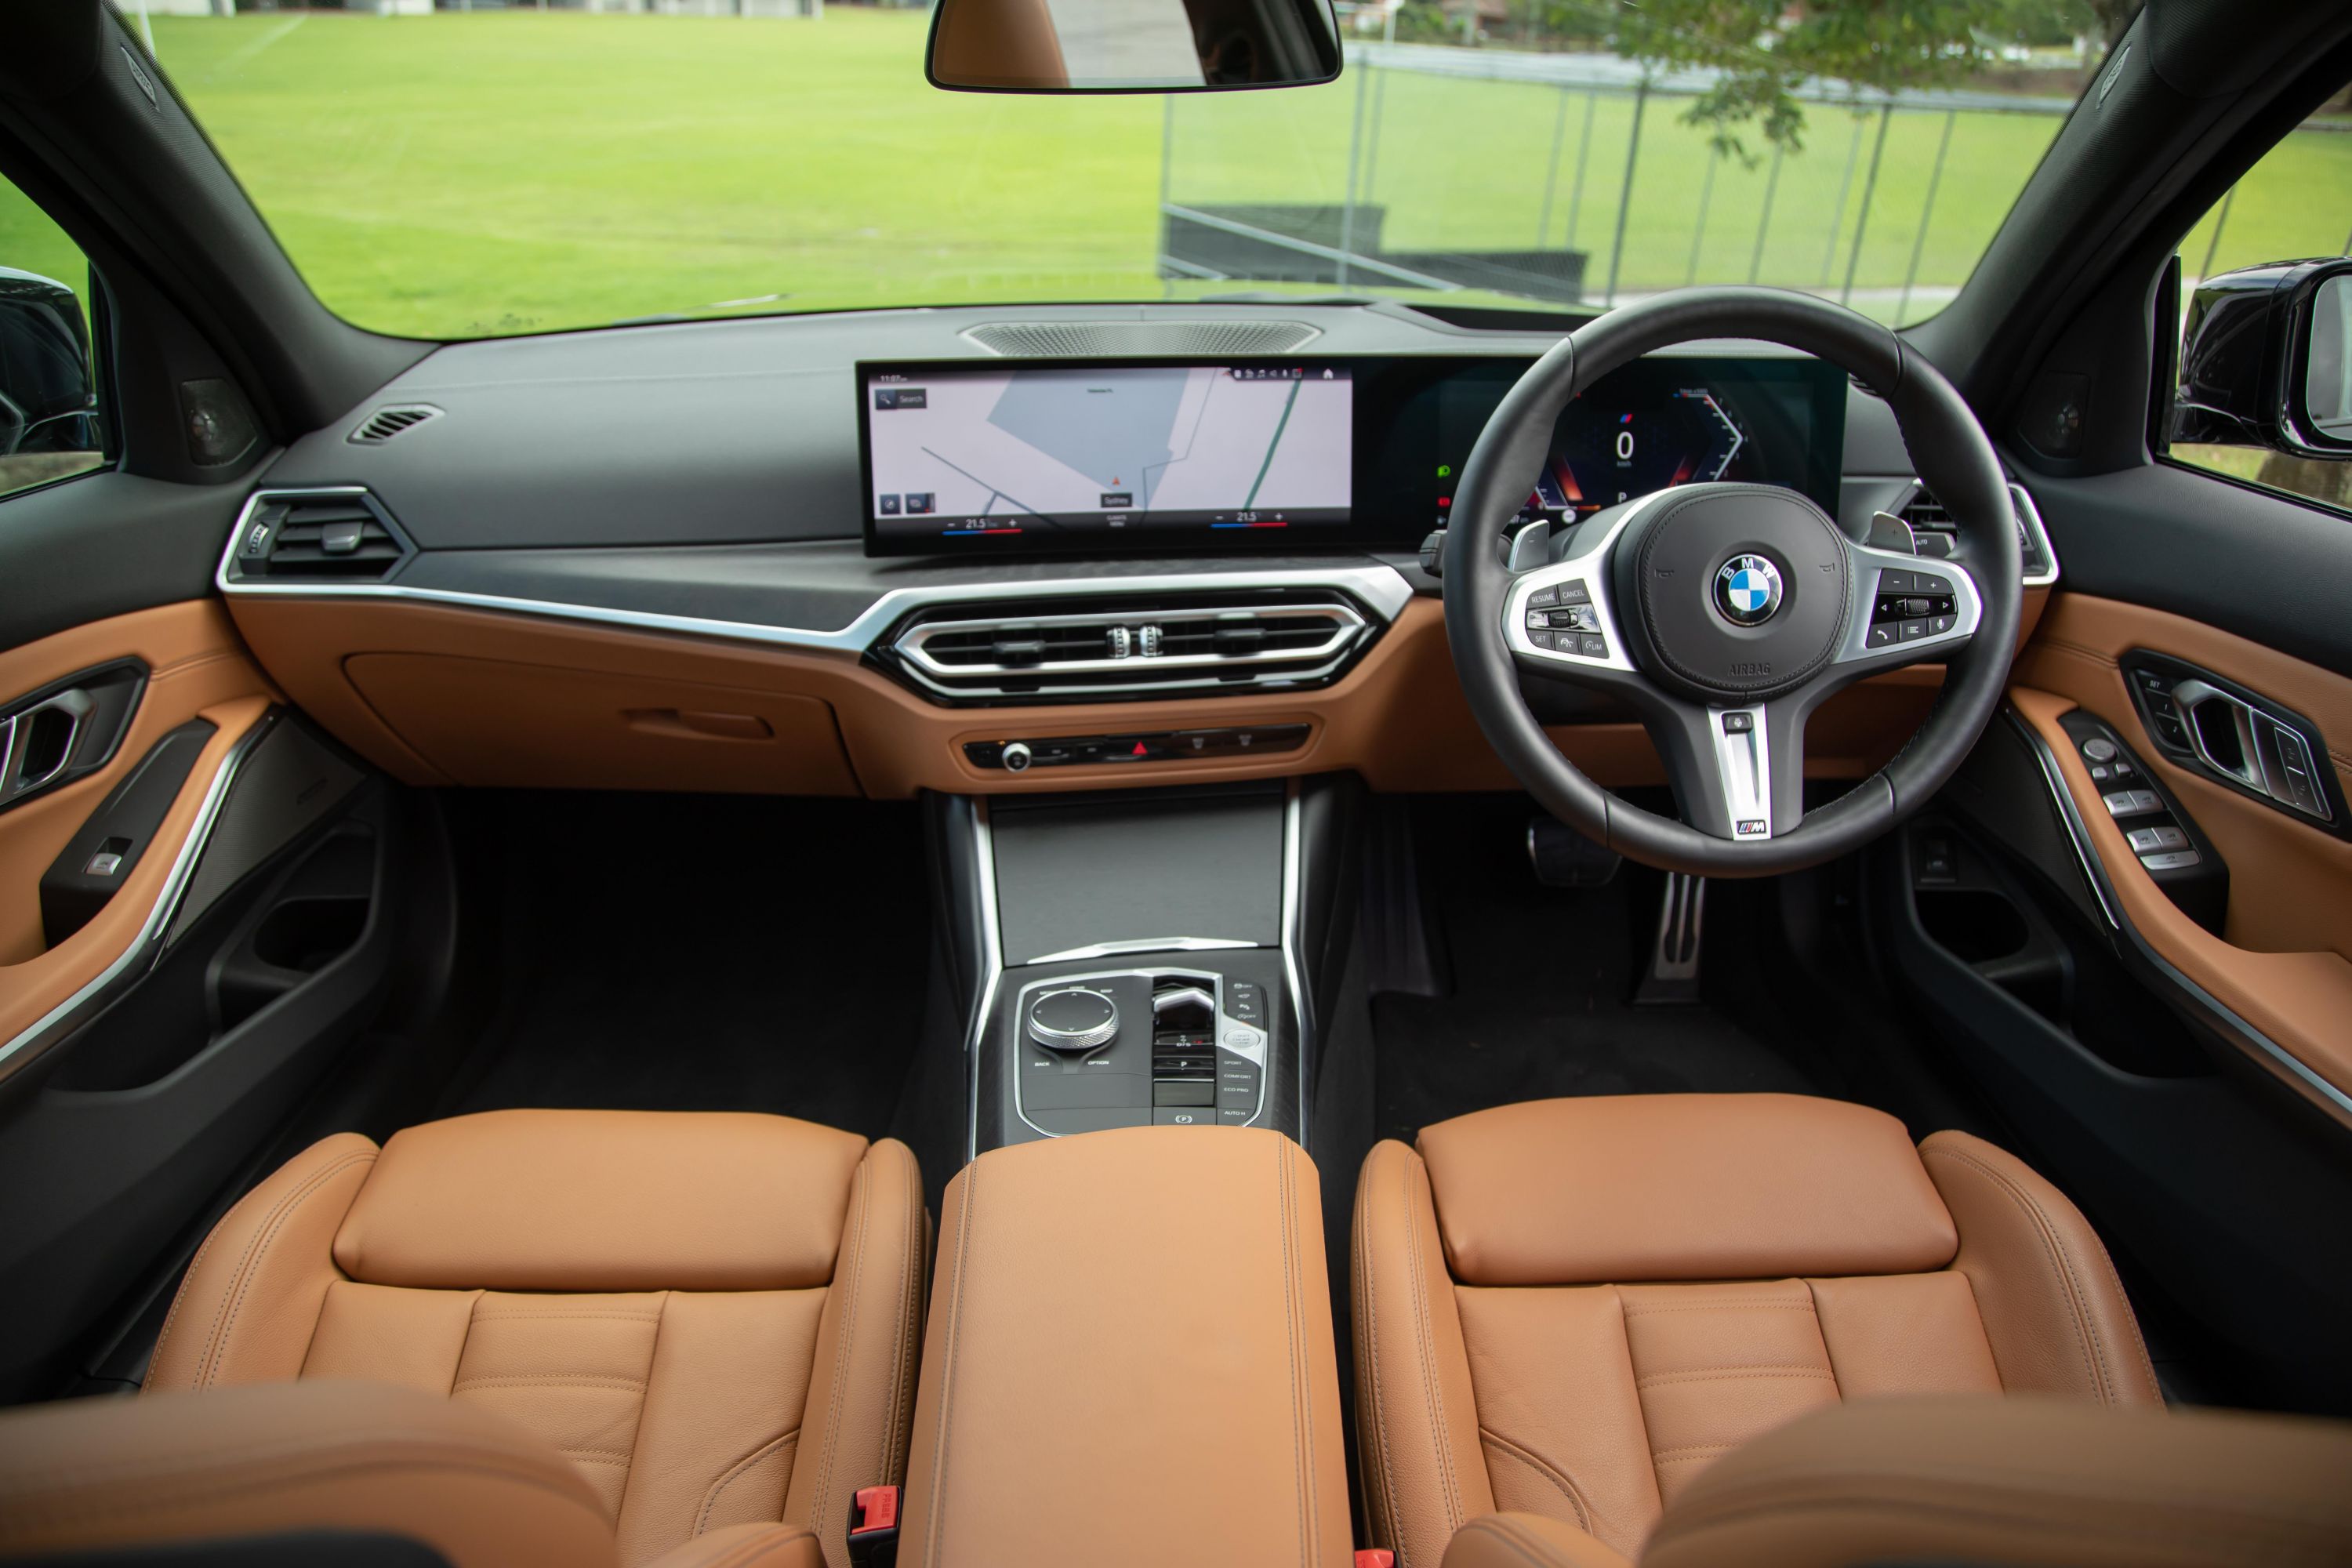 Driving a rented BMW 330i in Malaysia: Pros, cons & experience